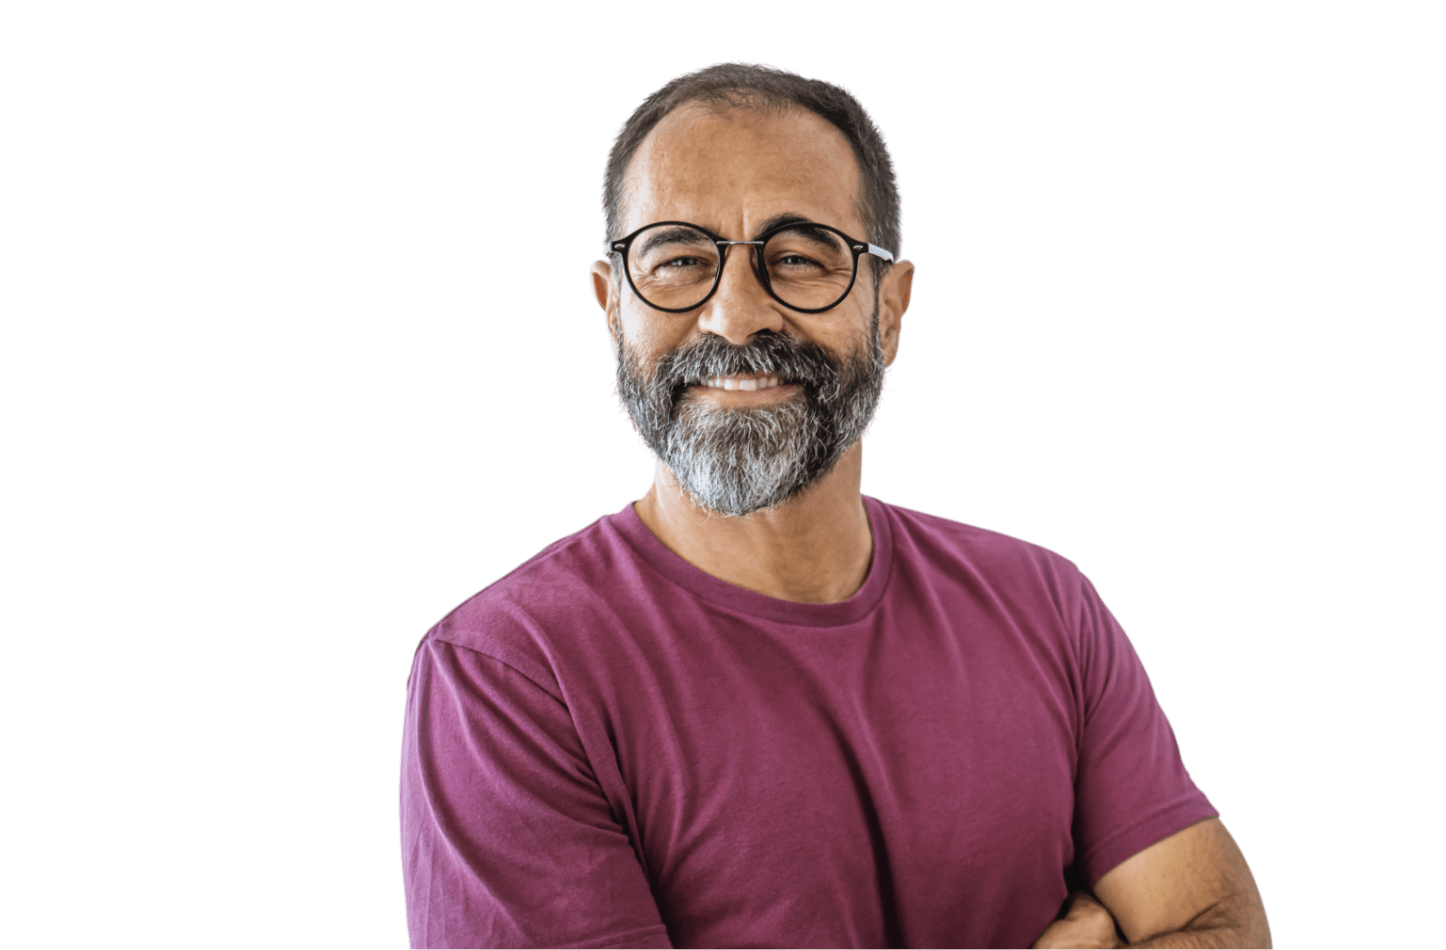 Man in maroon t-shirt with glasses and a beard smiling with his arms folded